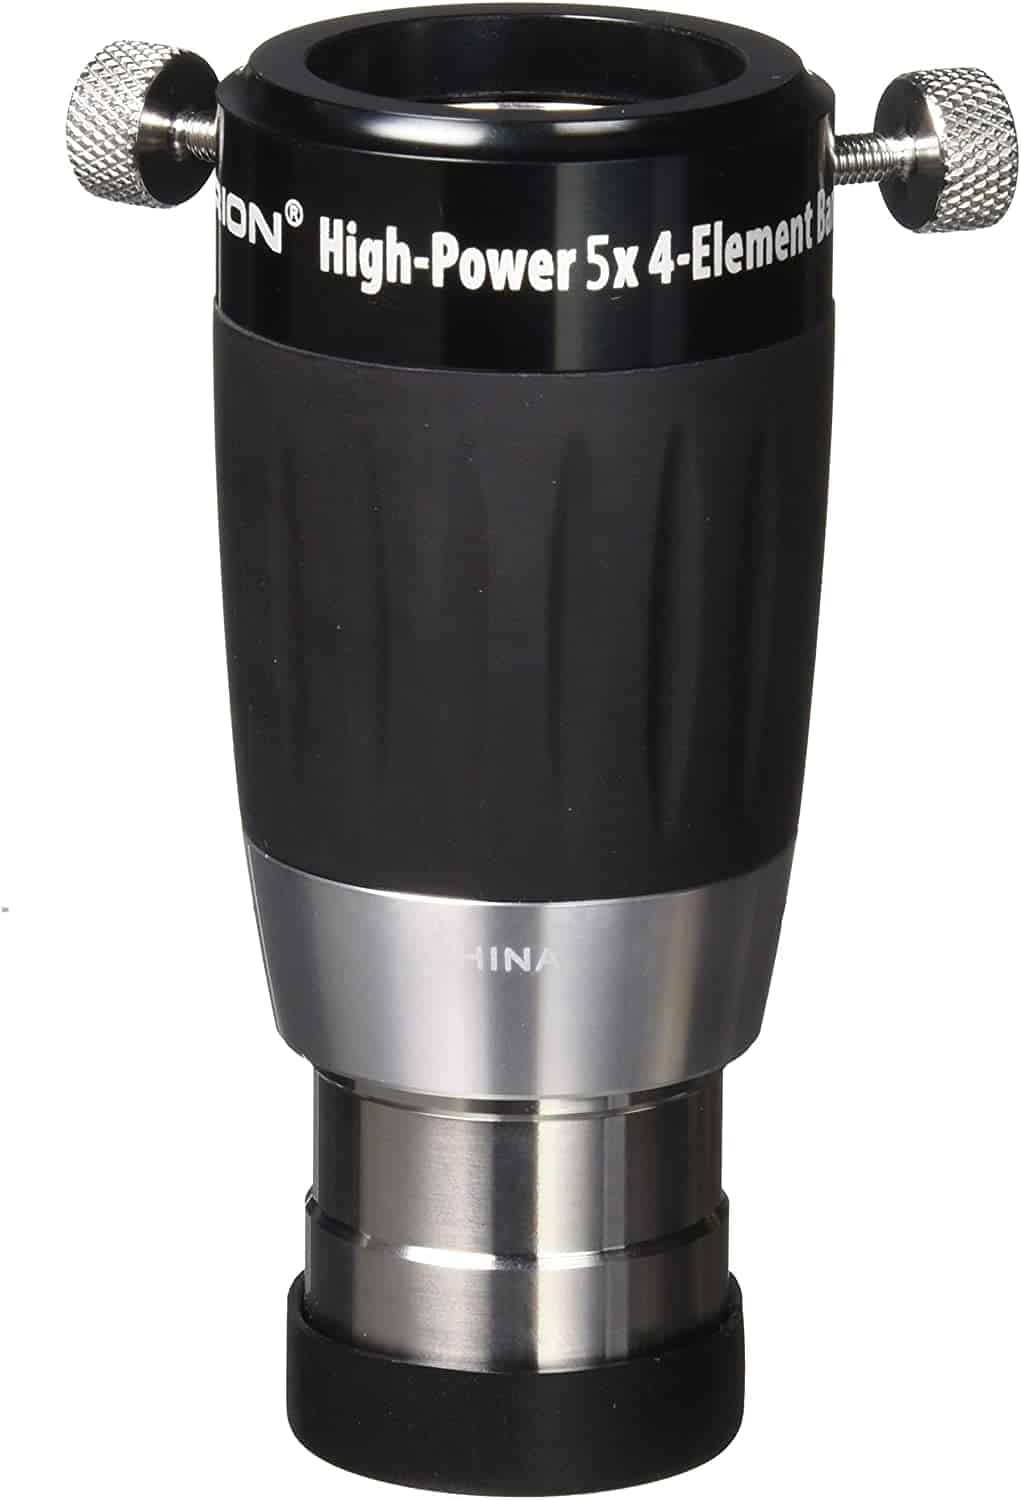 Orion 8715 High-Power 1.25-Inch 5x 4-Element Barlow Lens